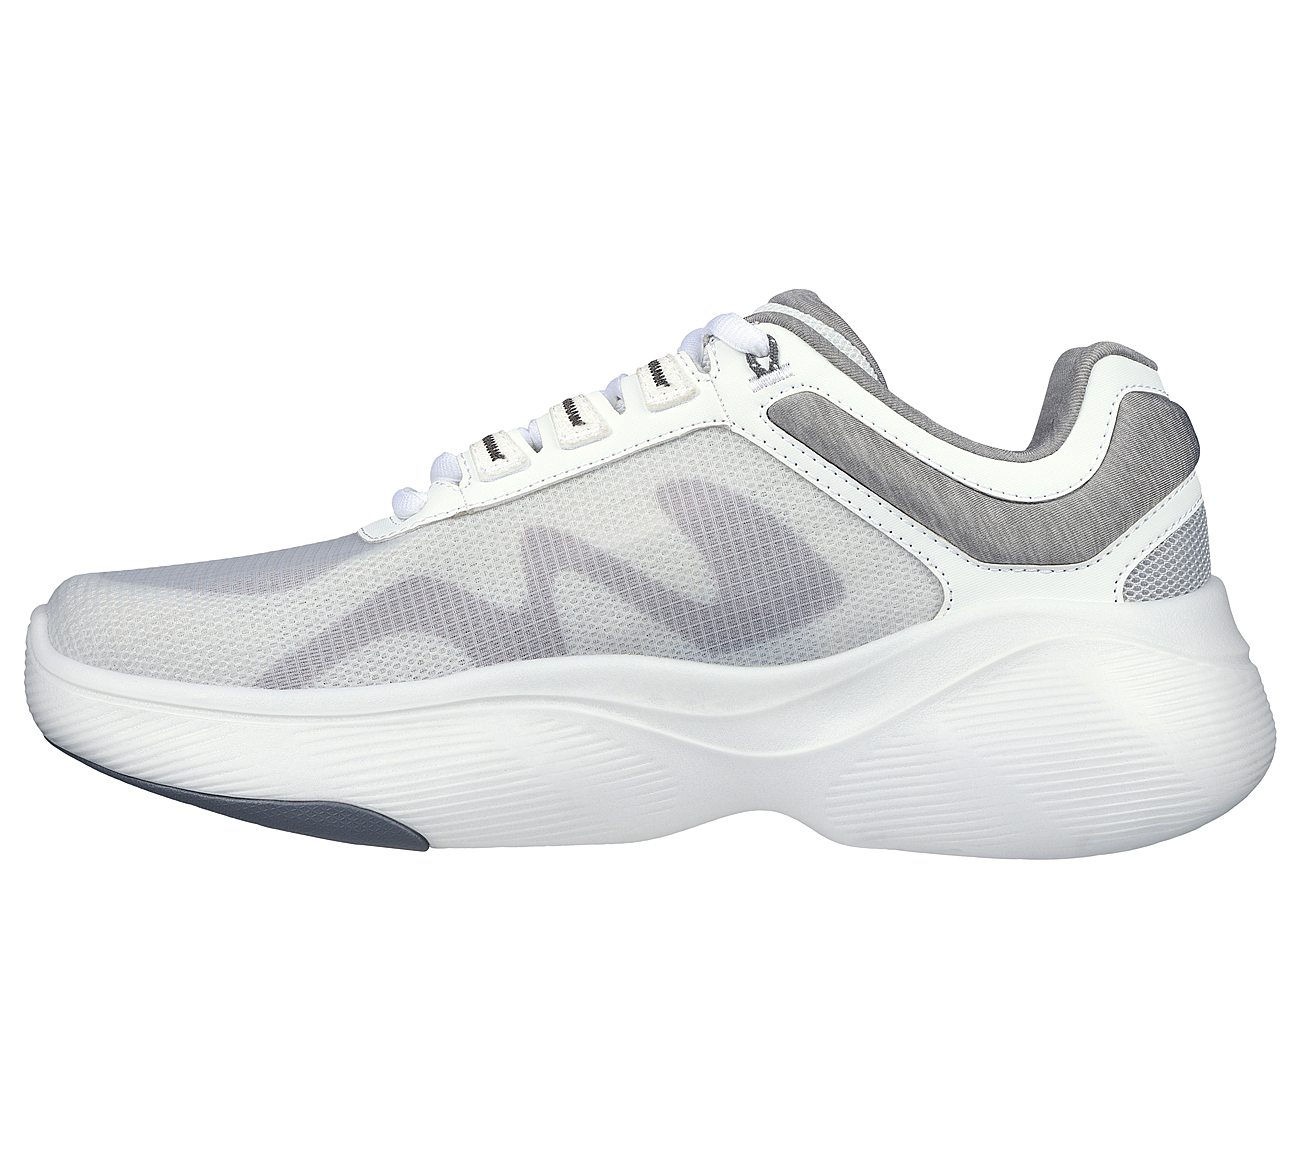 ARCH FIT INFINITY, WHITE/GREY Footwear Left View